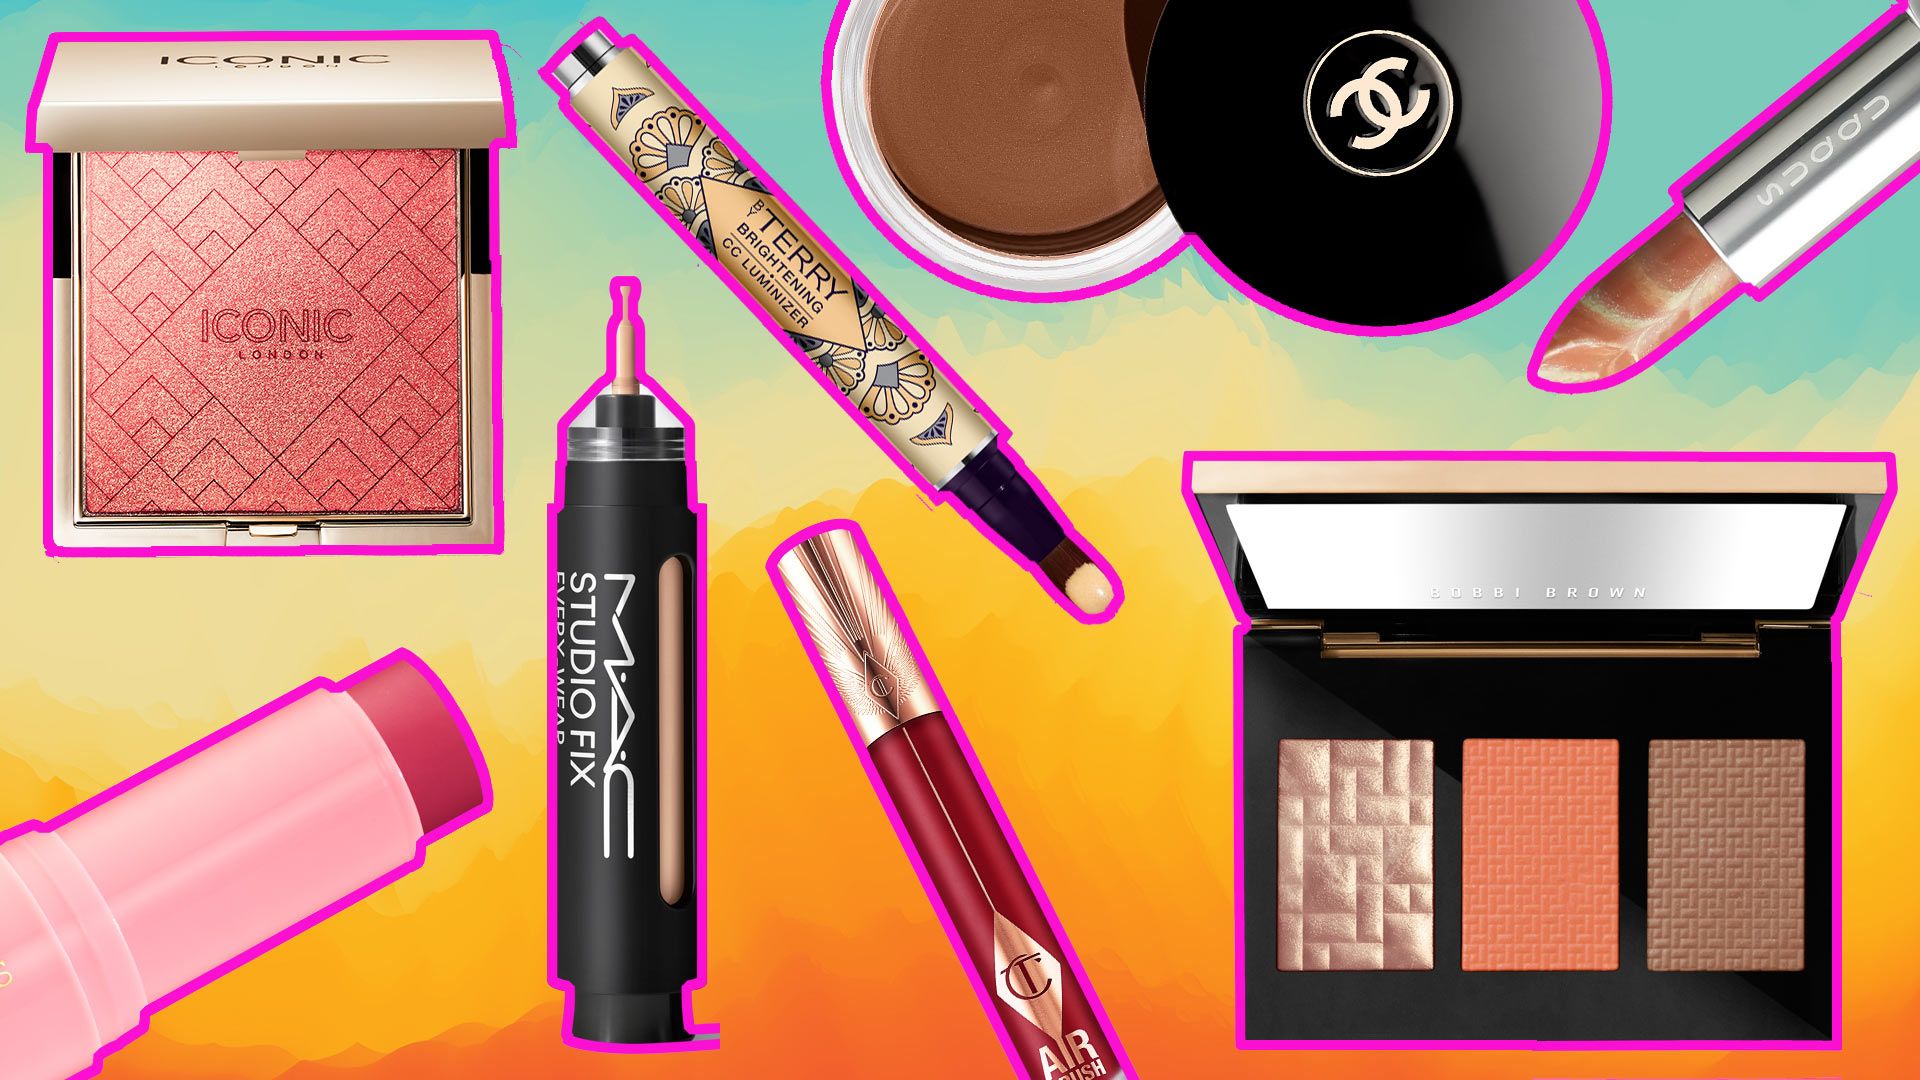 The best new beauty products 2023: New makeup & skincare launches